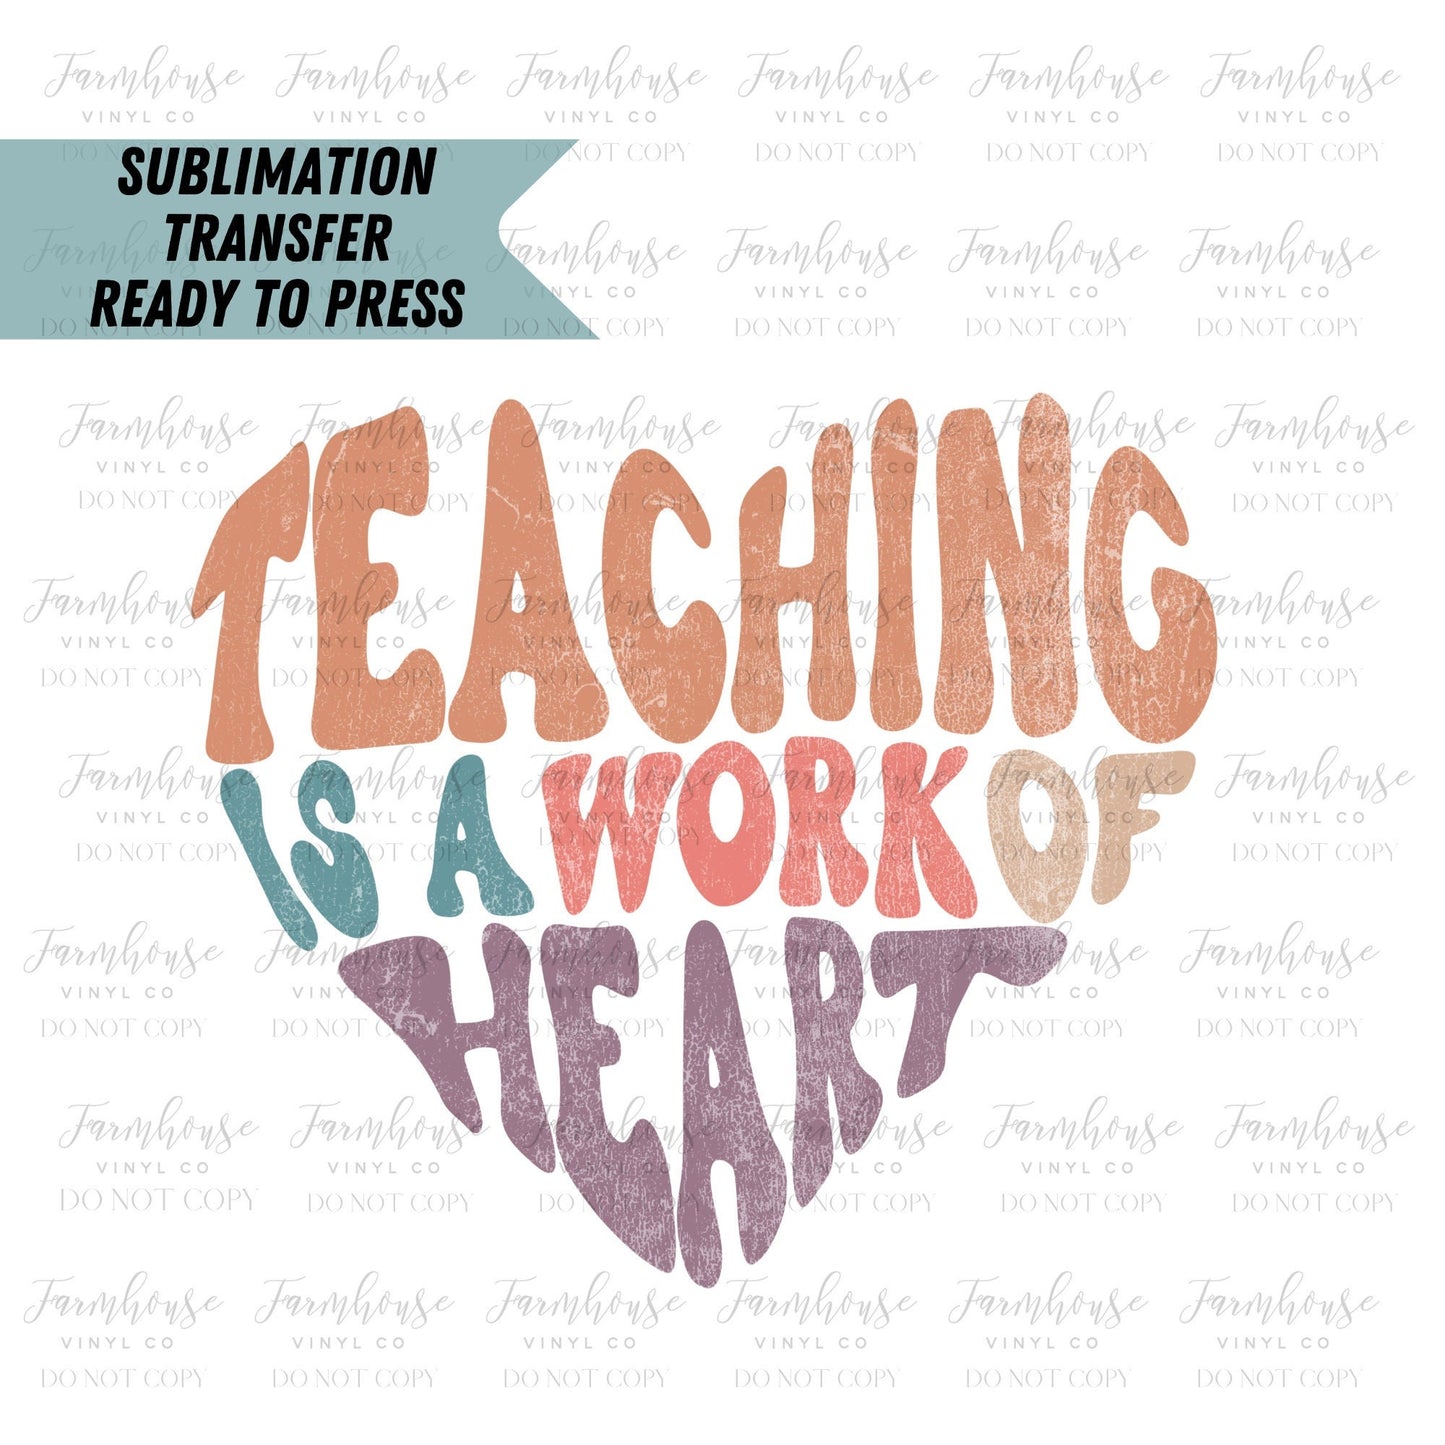 Teaching is a Work of Heart  Ready to Press Sublimation Transfer - Farmhouse Vinyl Co